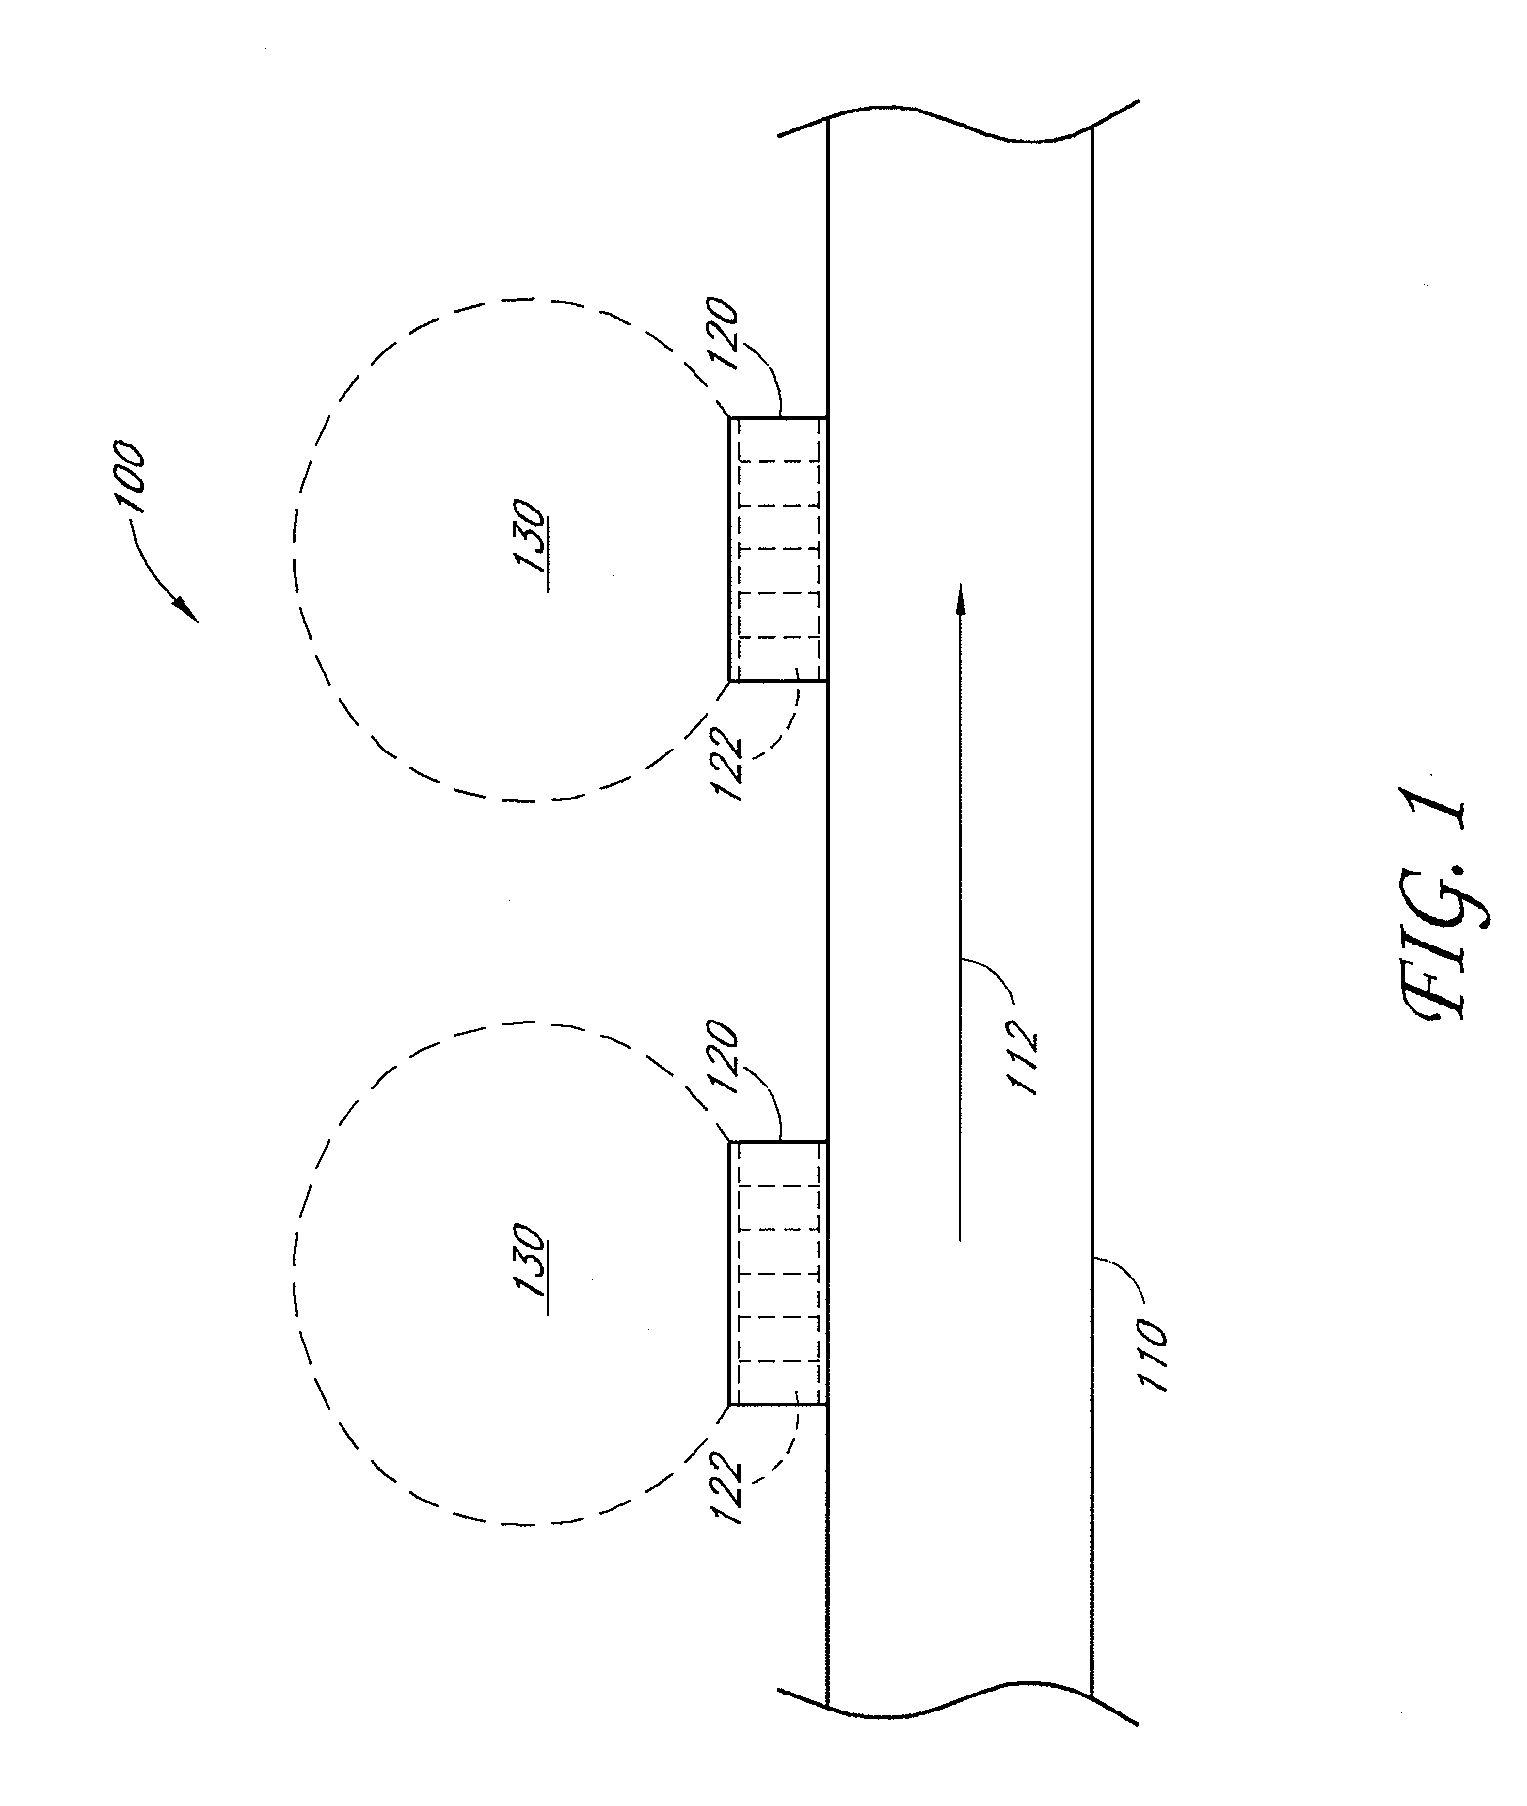 System and method for climate control within a passenger compartment of a vehicle